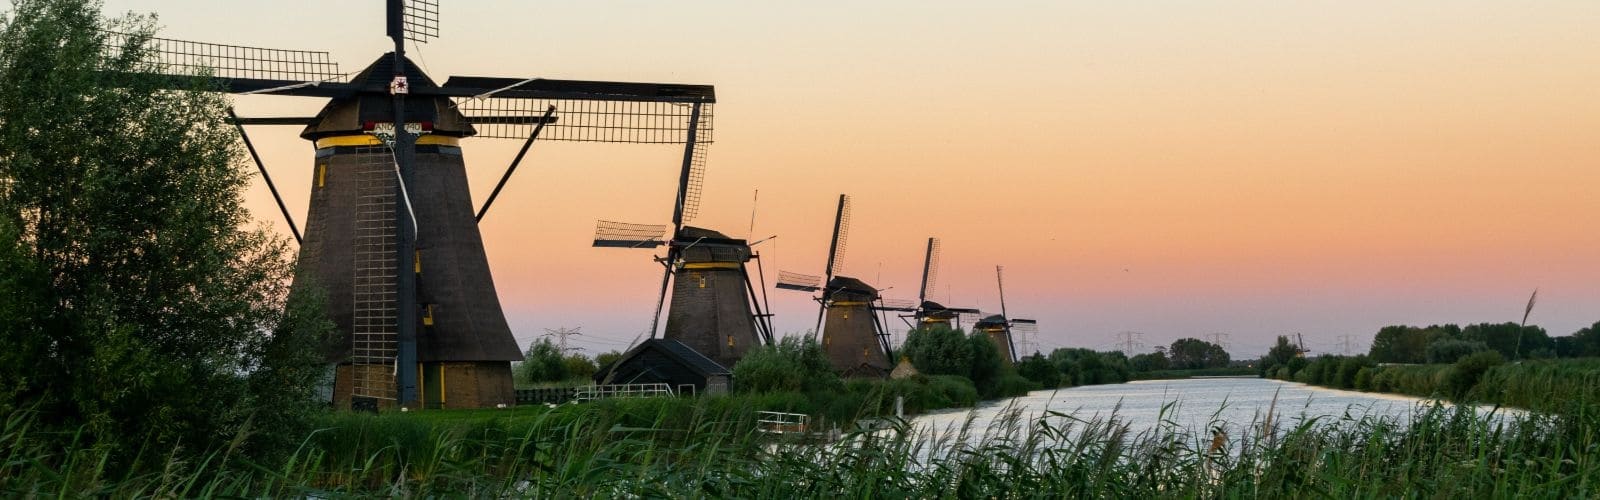 5 Best Reasons to Do an Internship in the Netherlands